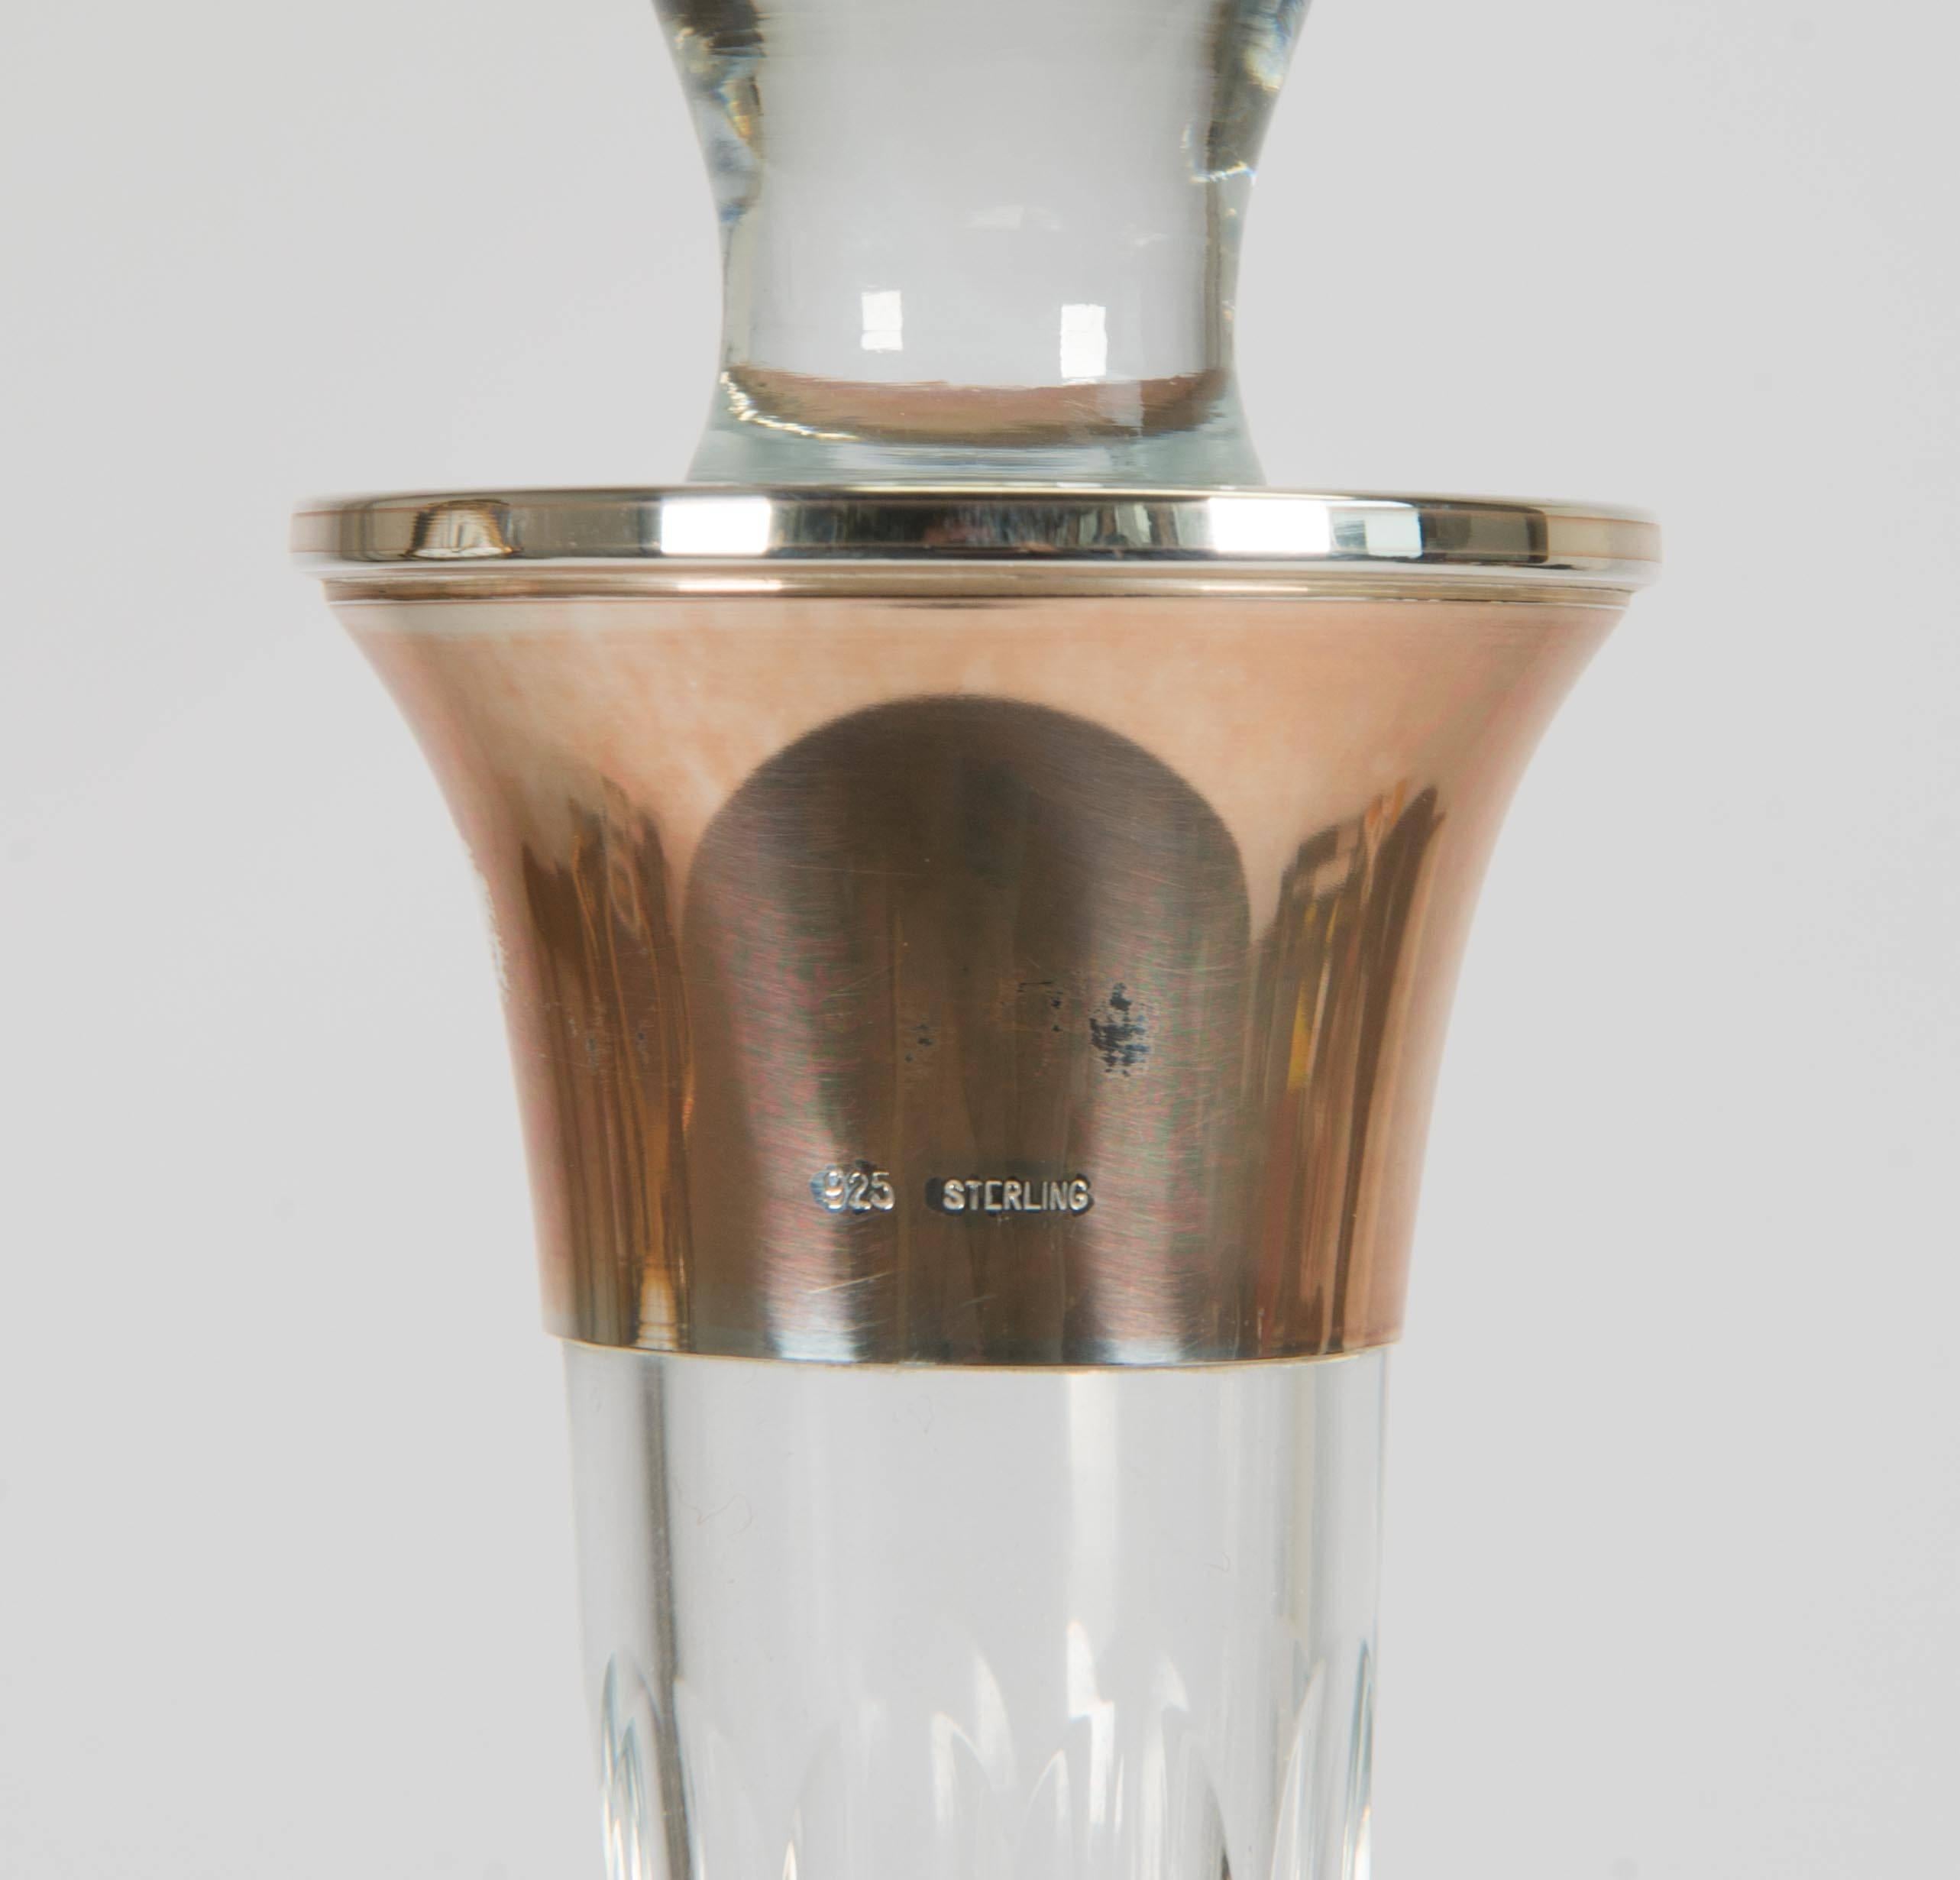 Fine crystal decanter with sterling silver rim.
The rim is hallmarked: 925 sterling.

 